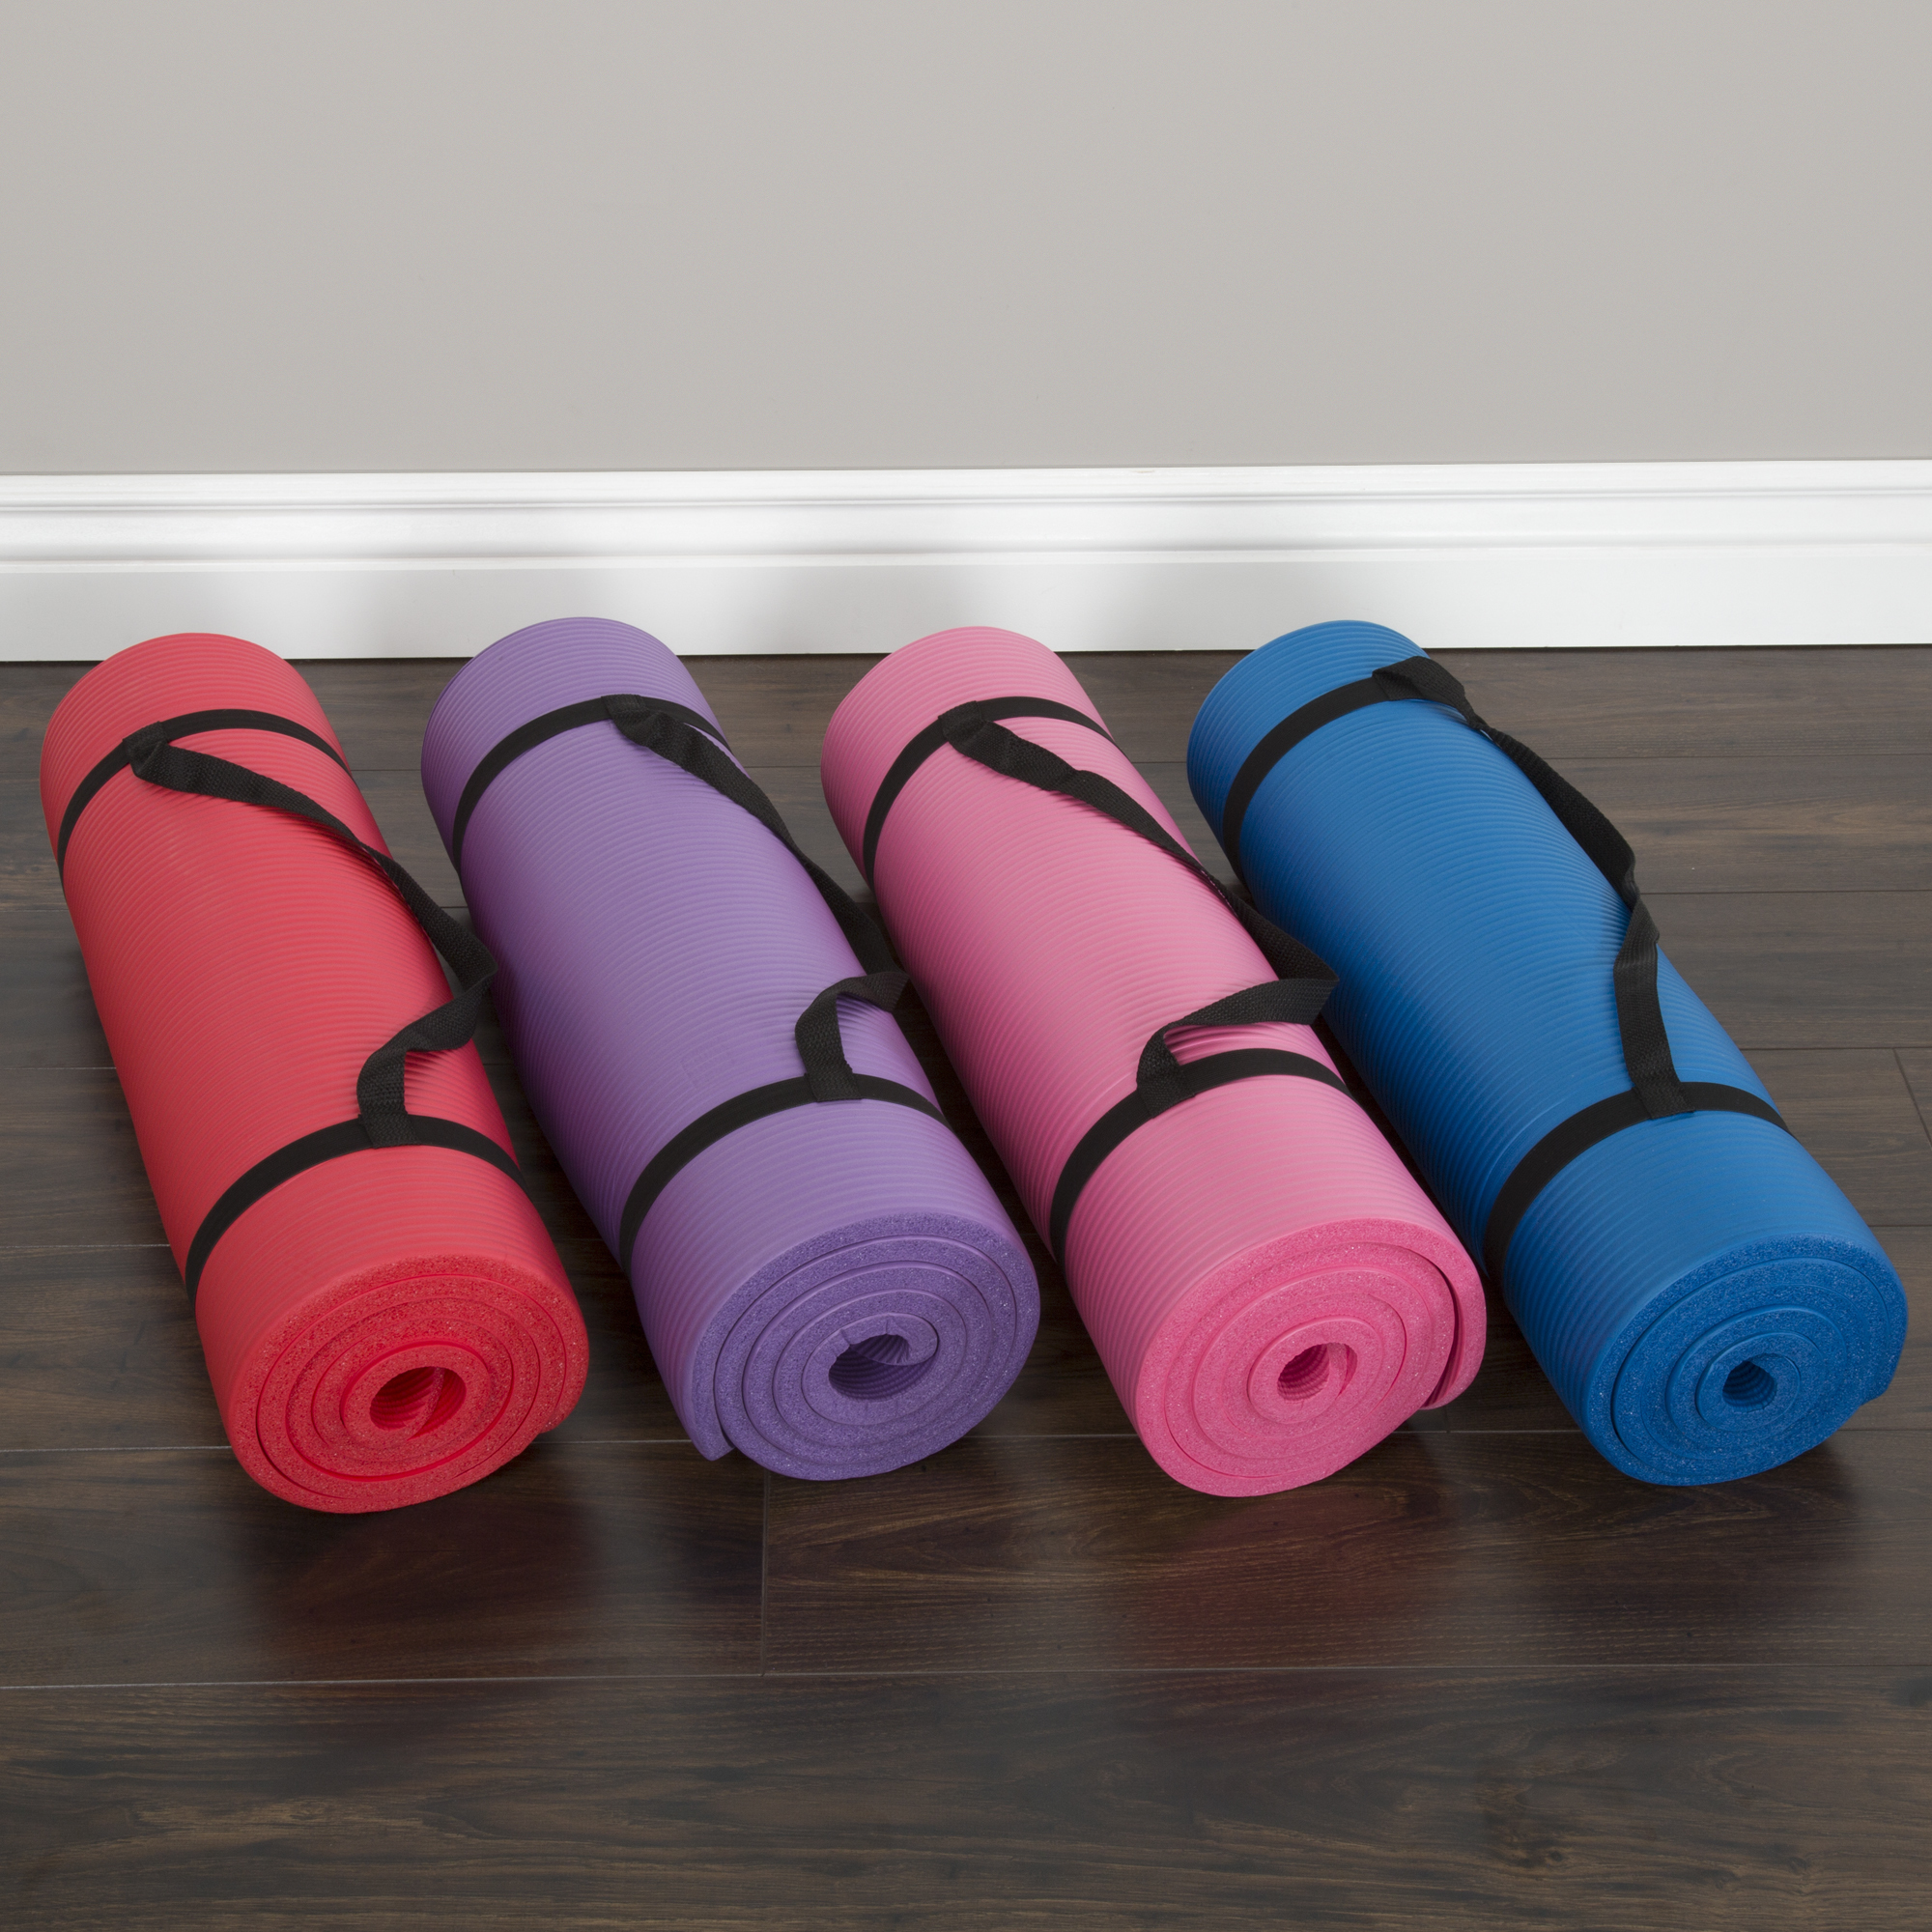 Portable, On Sale Yoga Accessories - Bed Bath & Beyond